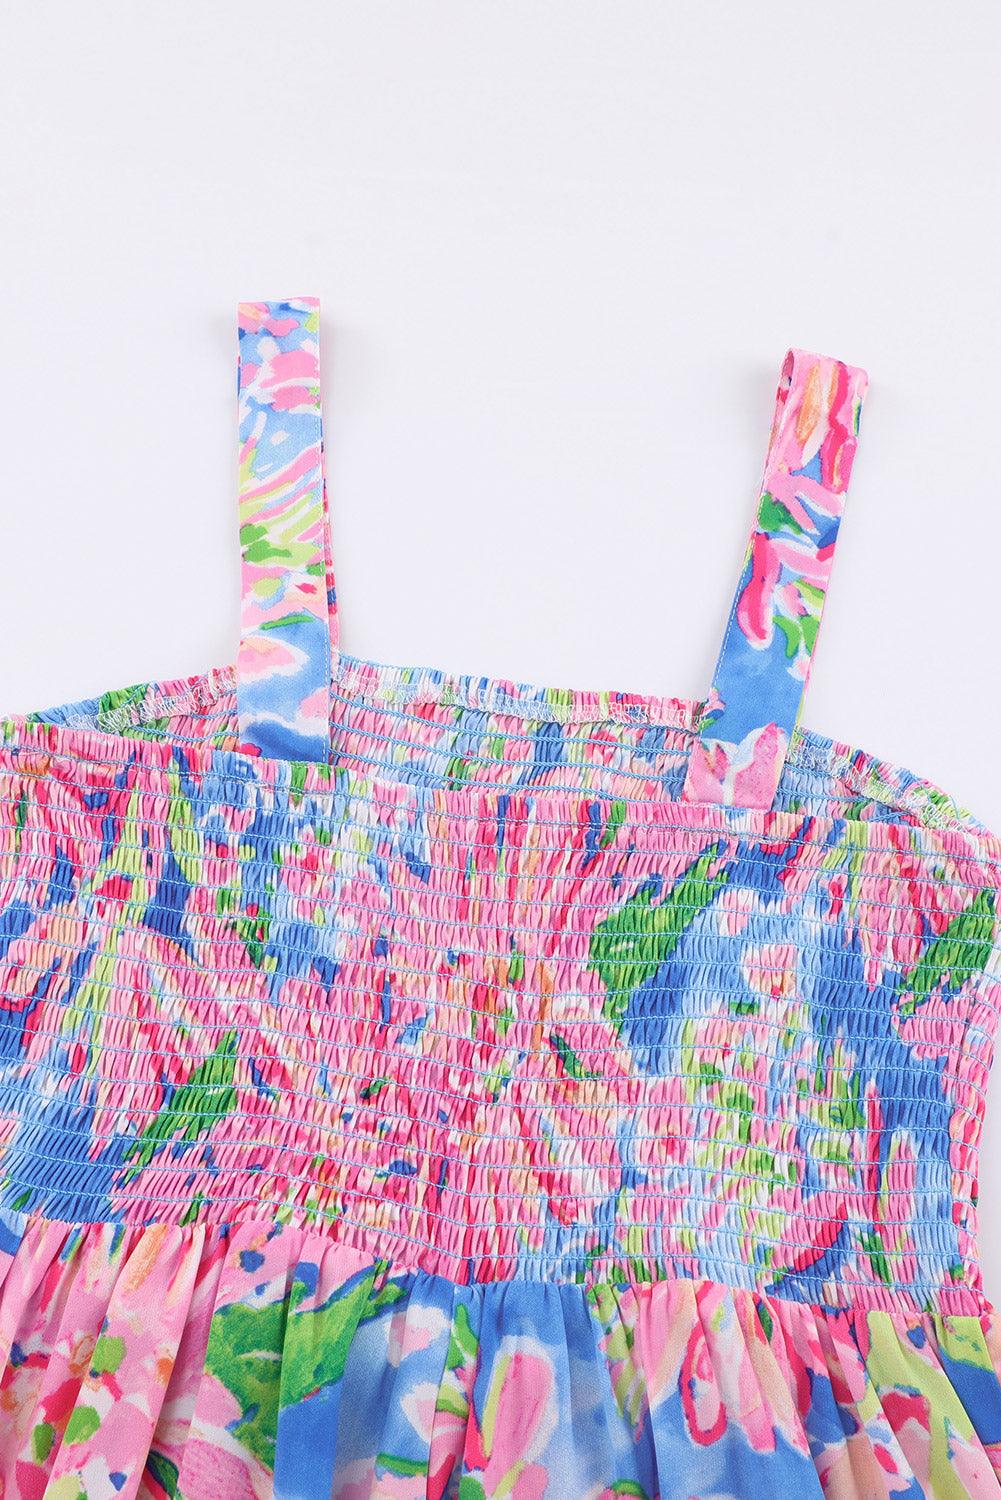 Pink Abstract Floral Painting Smocked Wide Leg Jumpsuit - Vesteeto